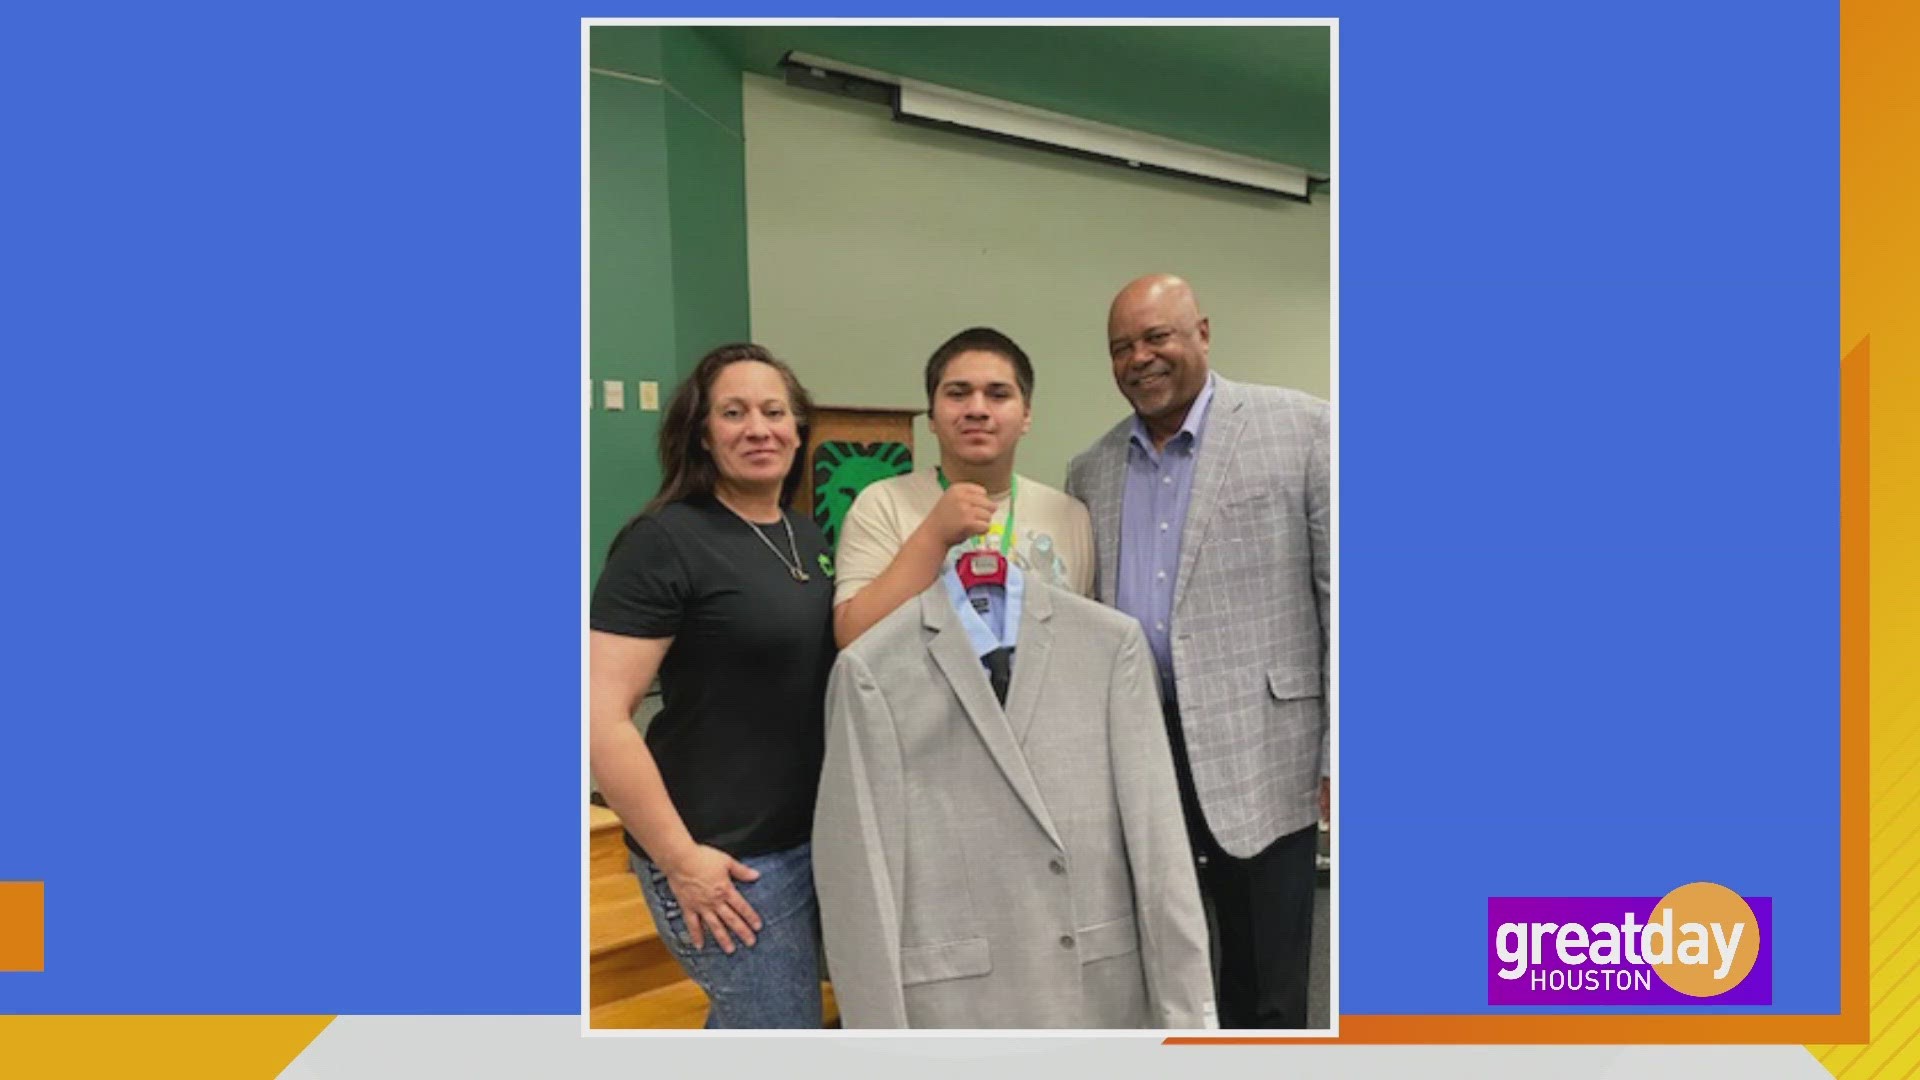 Gary Landry helps graduating seniors whose parents can't afford to buy them suits for graduation day.